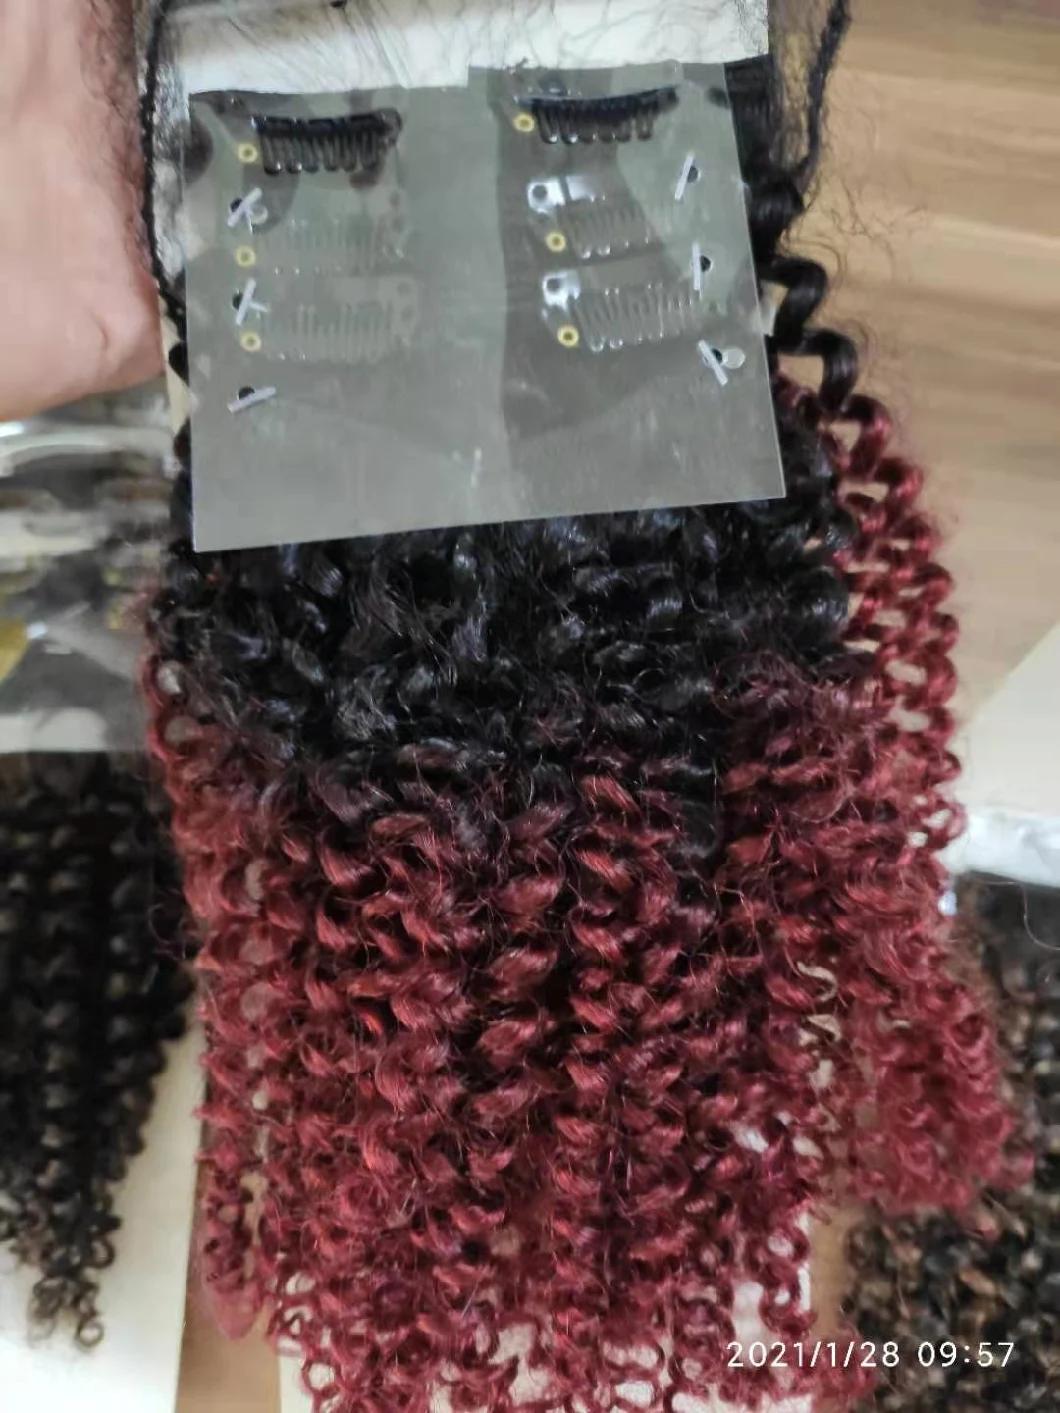 Kinky Curly Mink Brazilian Human Hair Clips-in Extensions